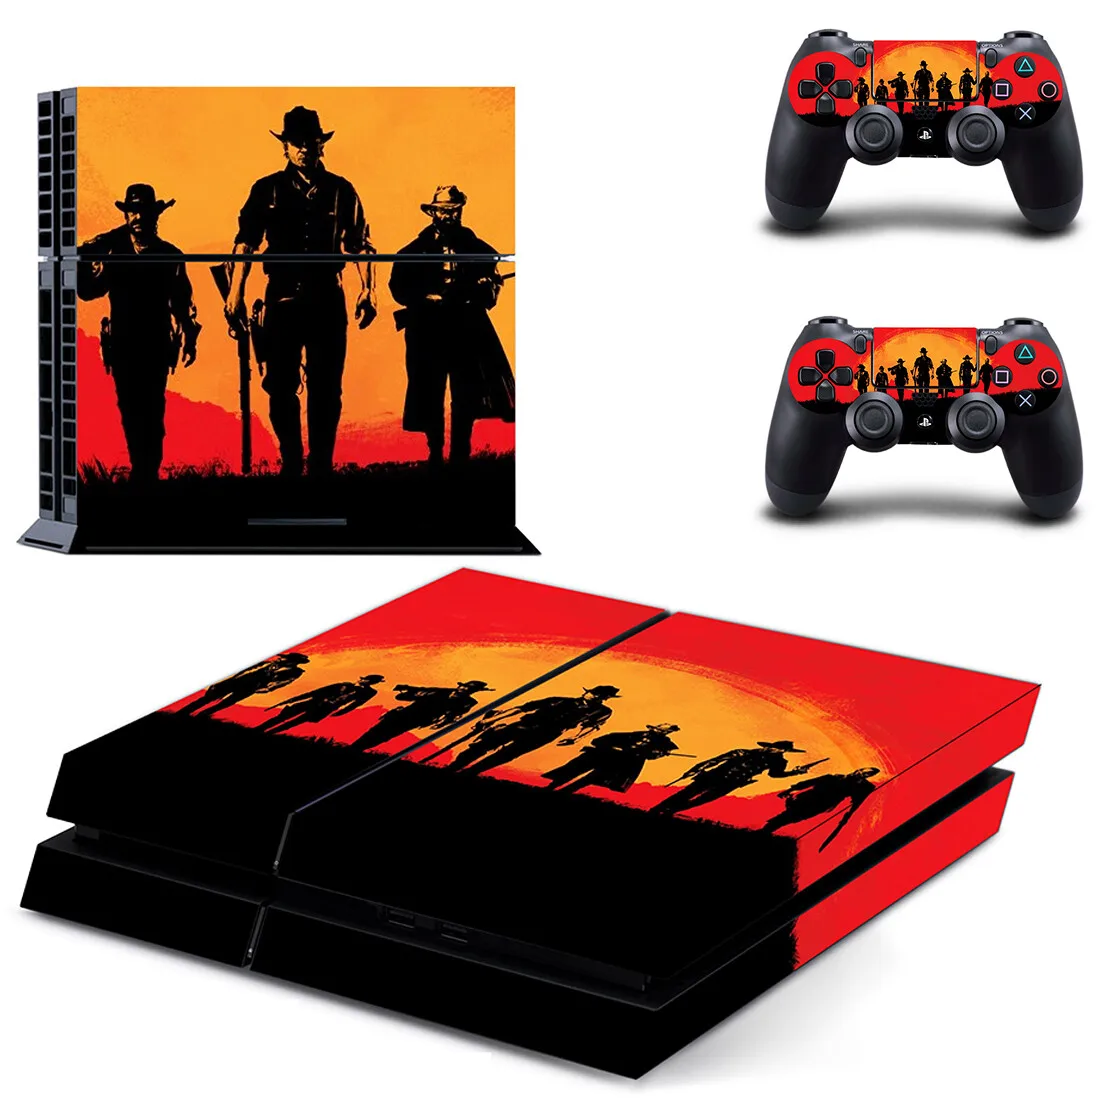 New Game PS4 Stickers Play station 4 Skin Sticker Decals For PlayStation 4 PS4 Console & Controller Skins Vinyl